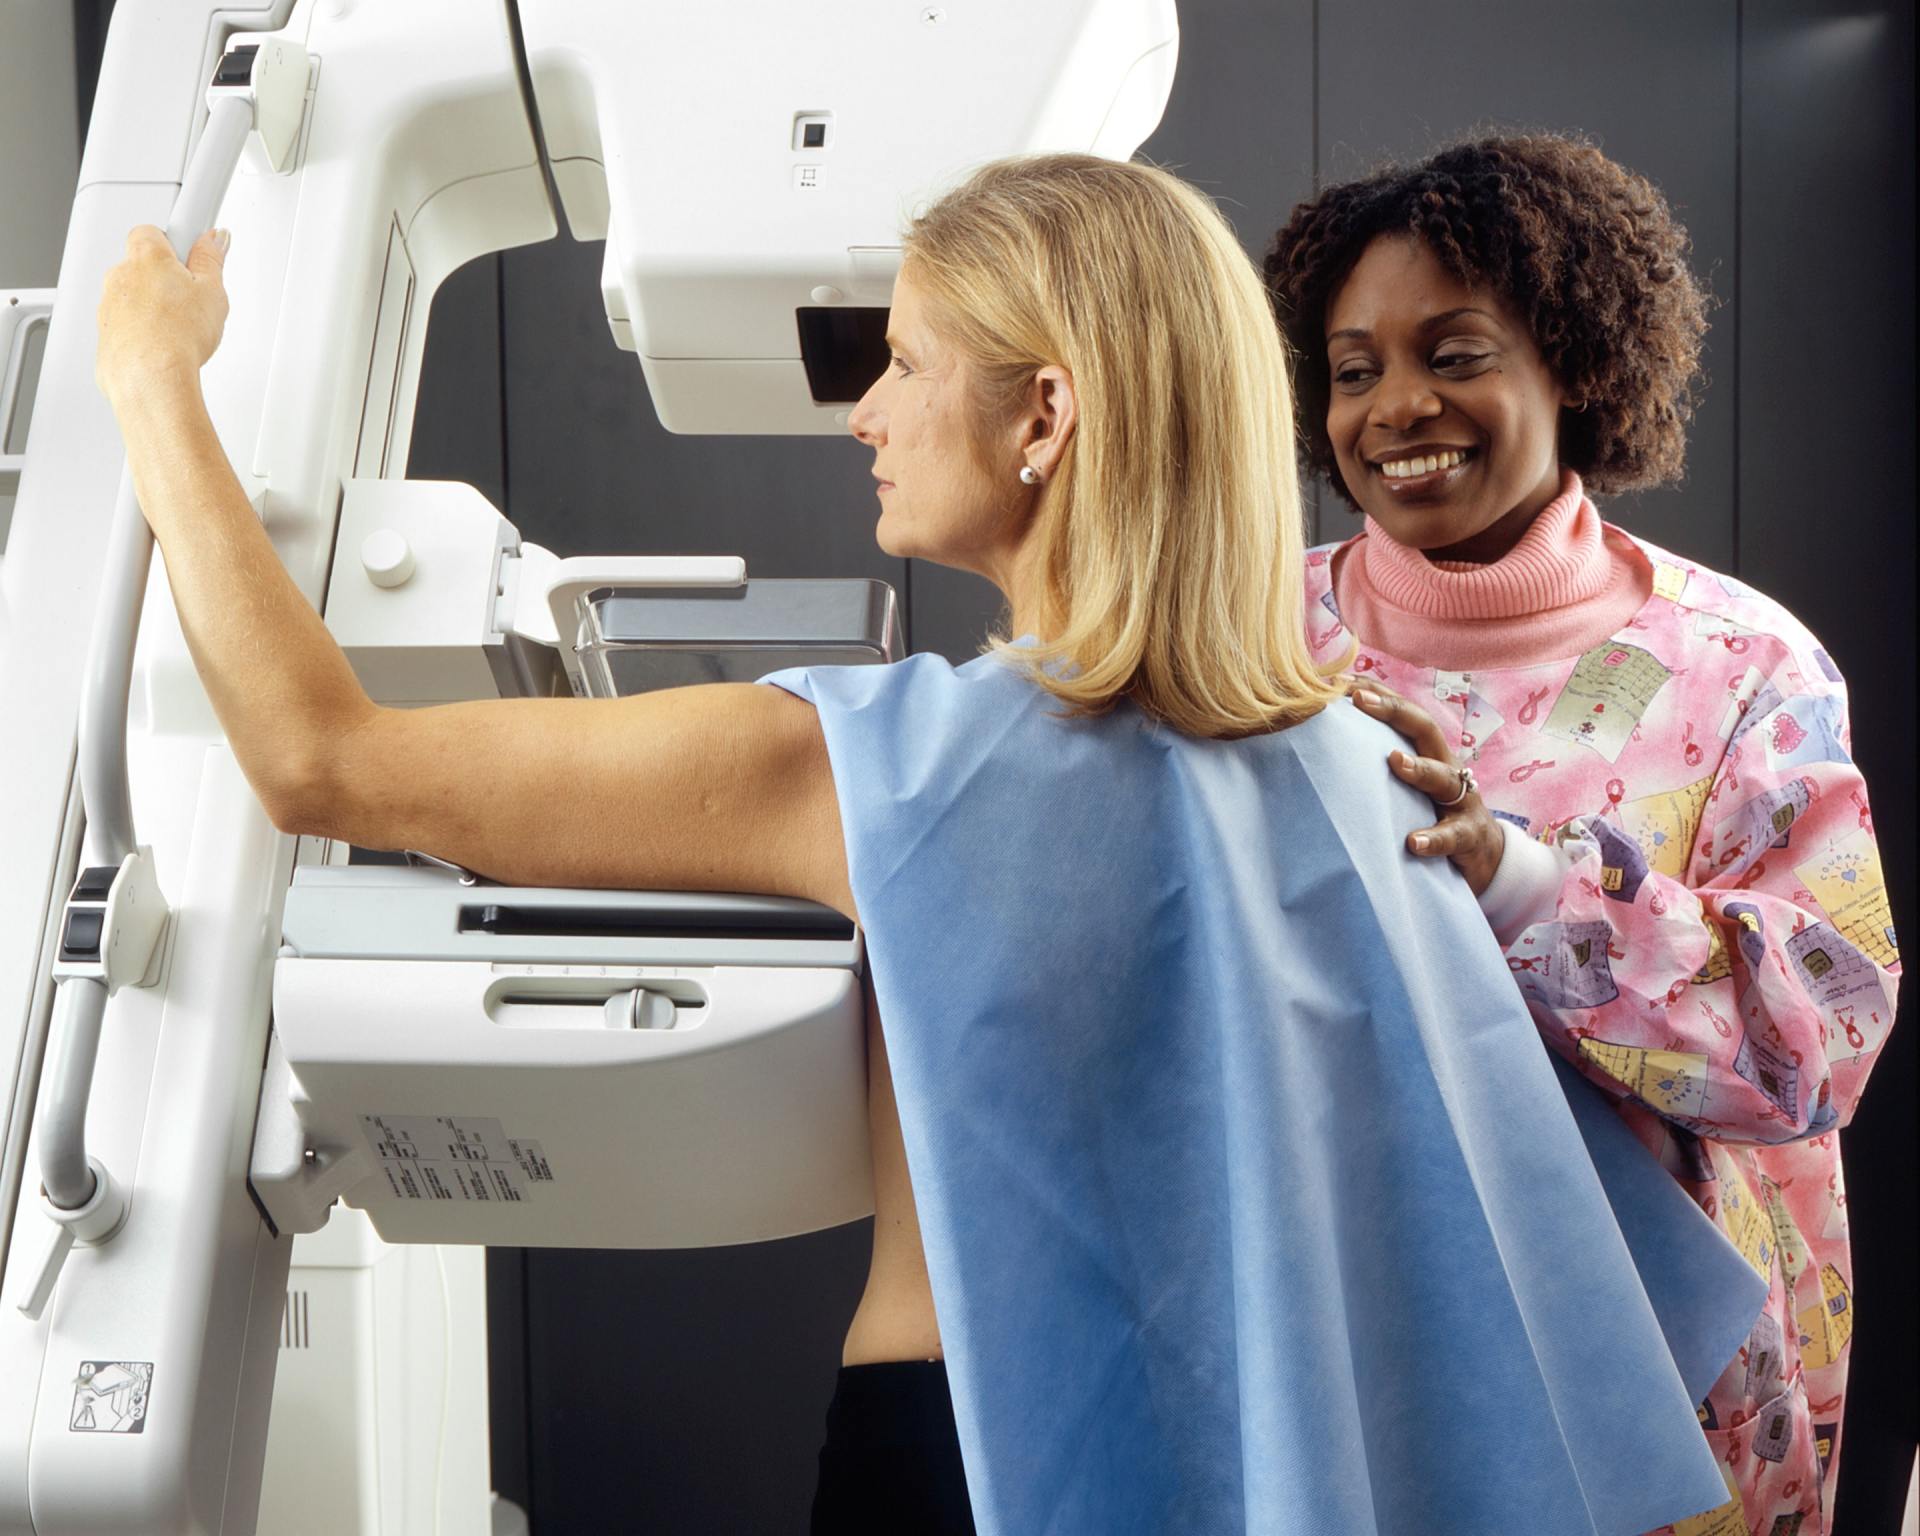 A woman is getting her breast examined by a doctor